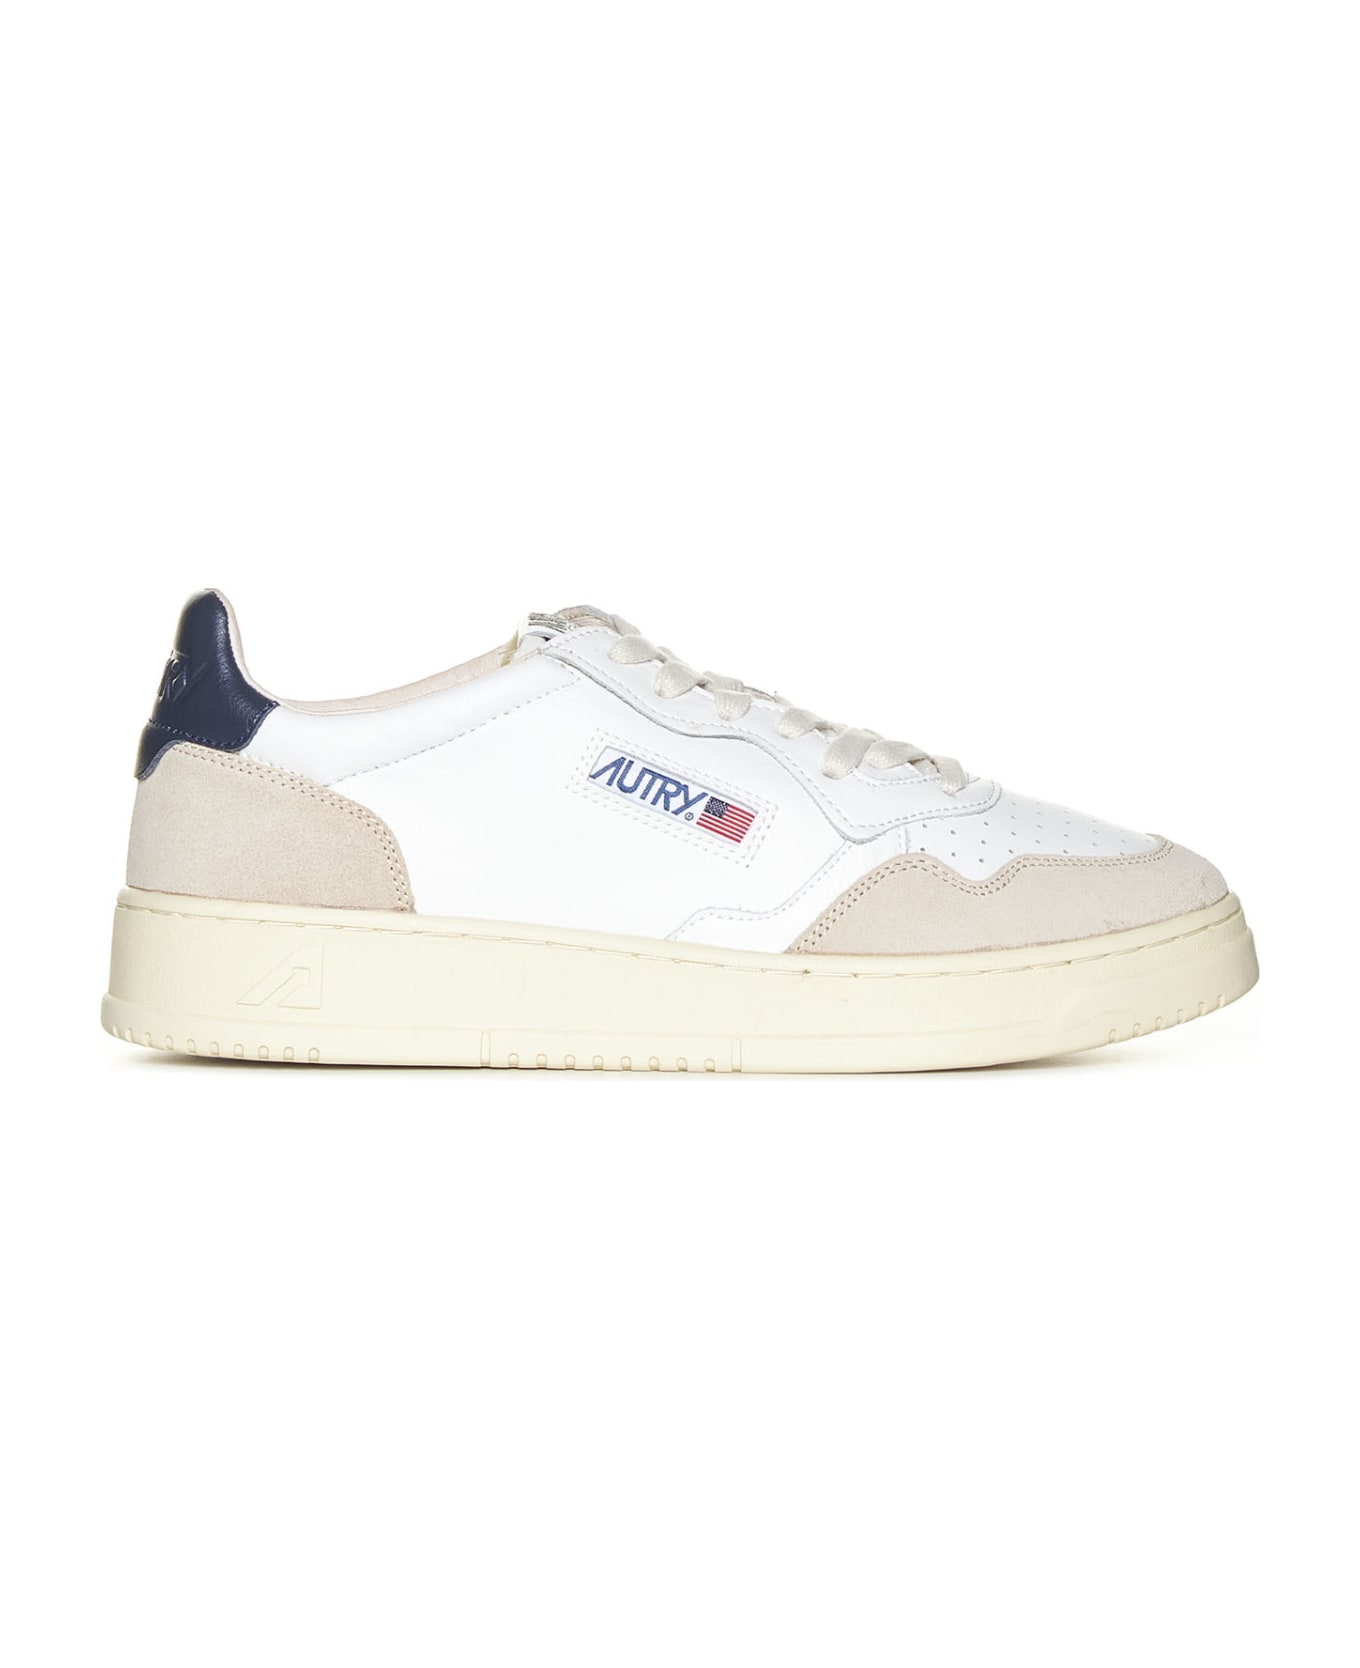 Autry Logo Patched Sneakers - White/Blue